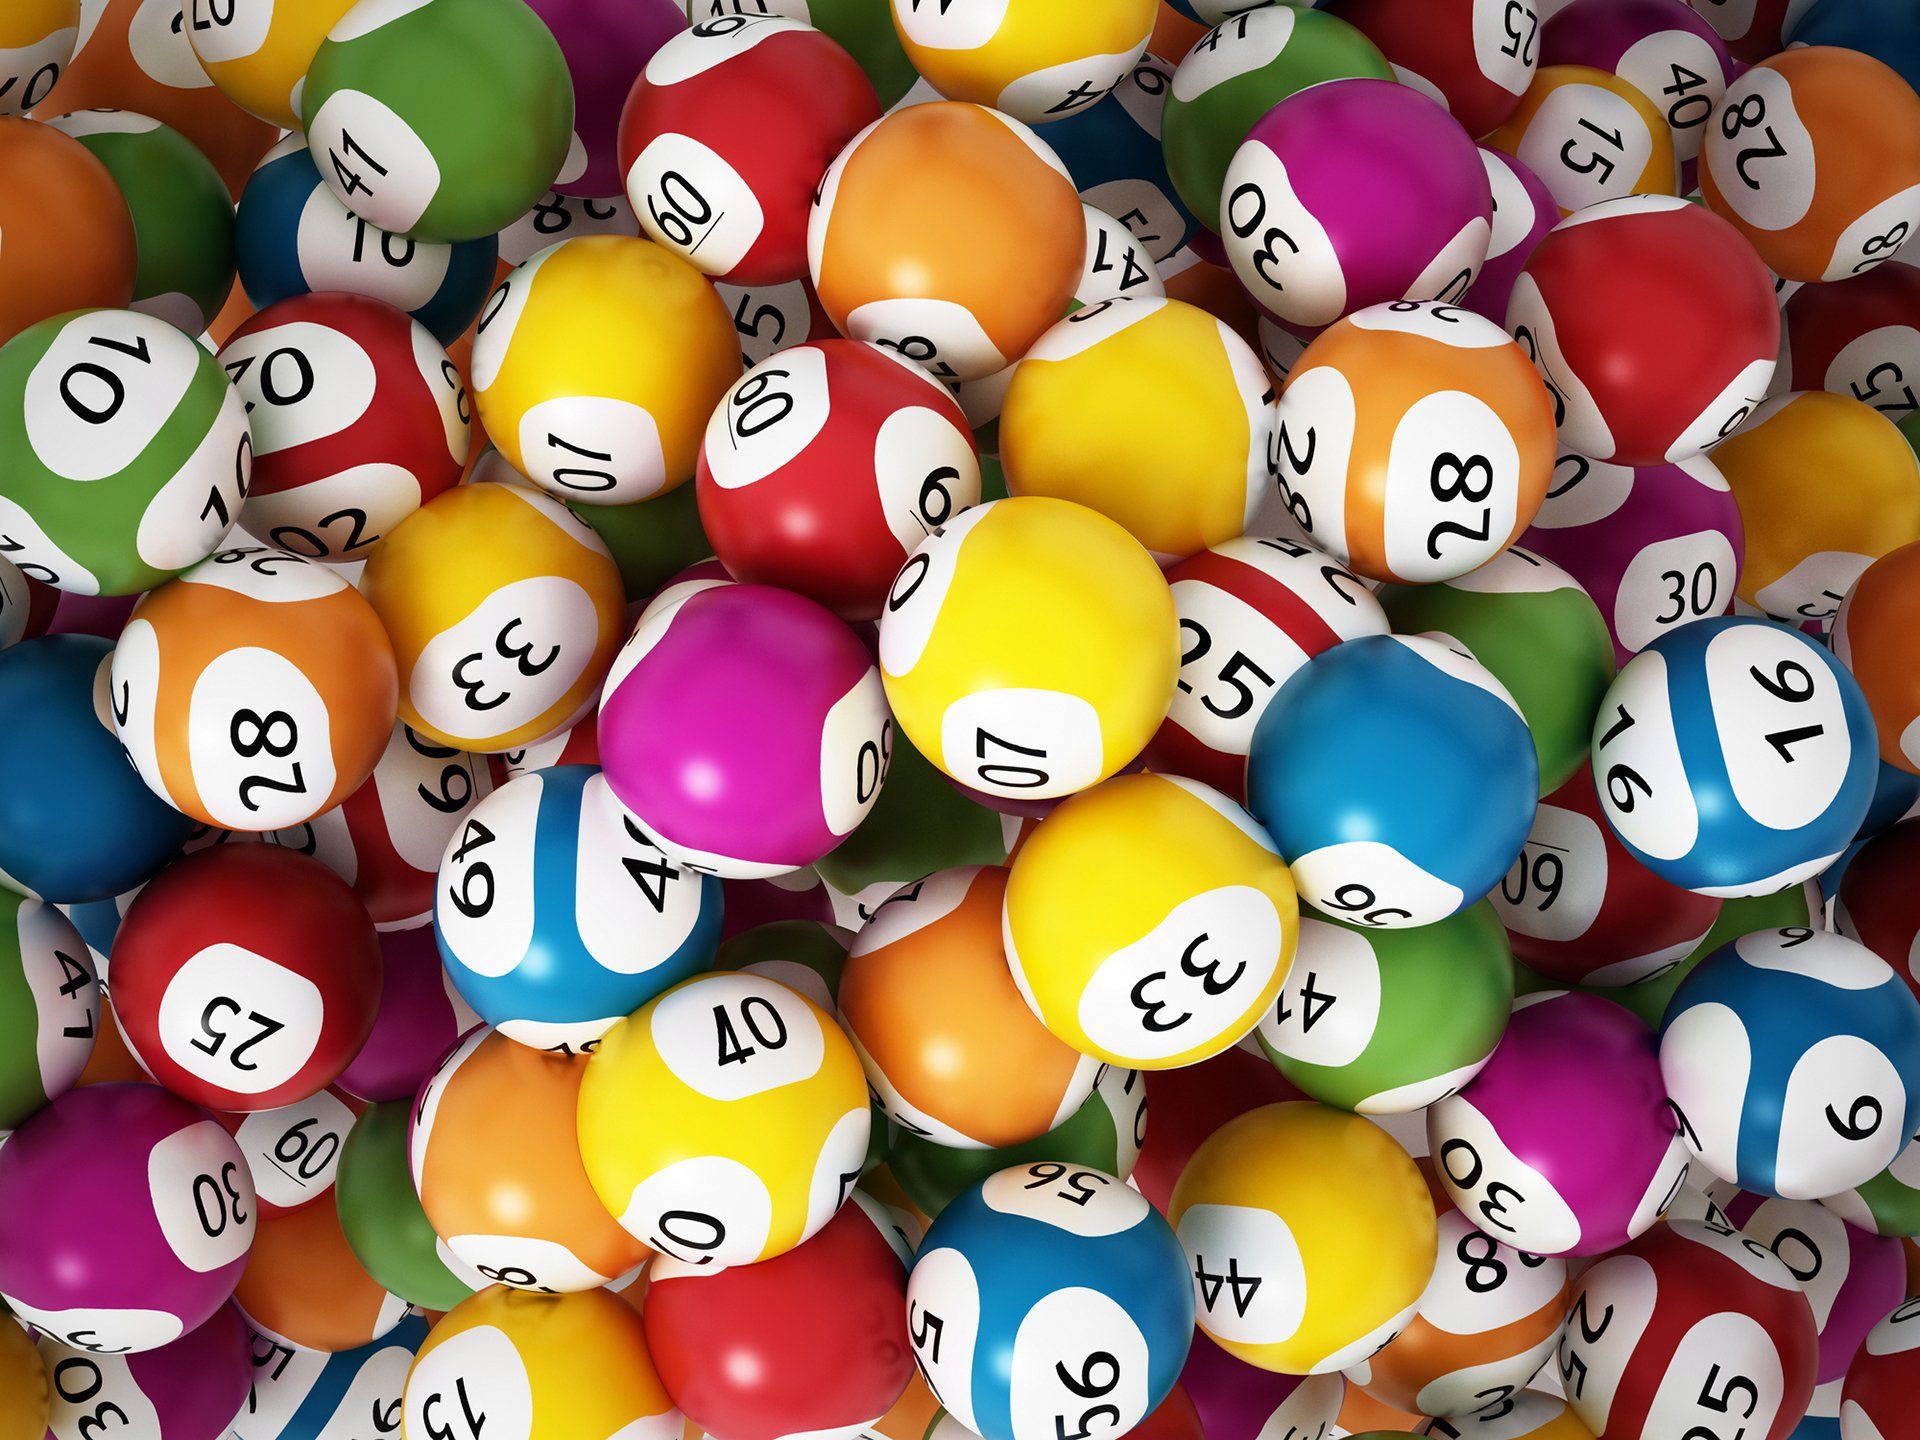 a pile of colorful pool balls with numbers on them